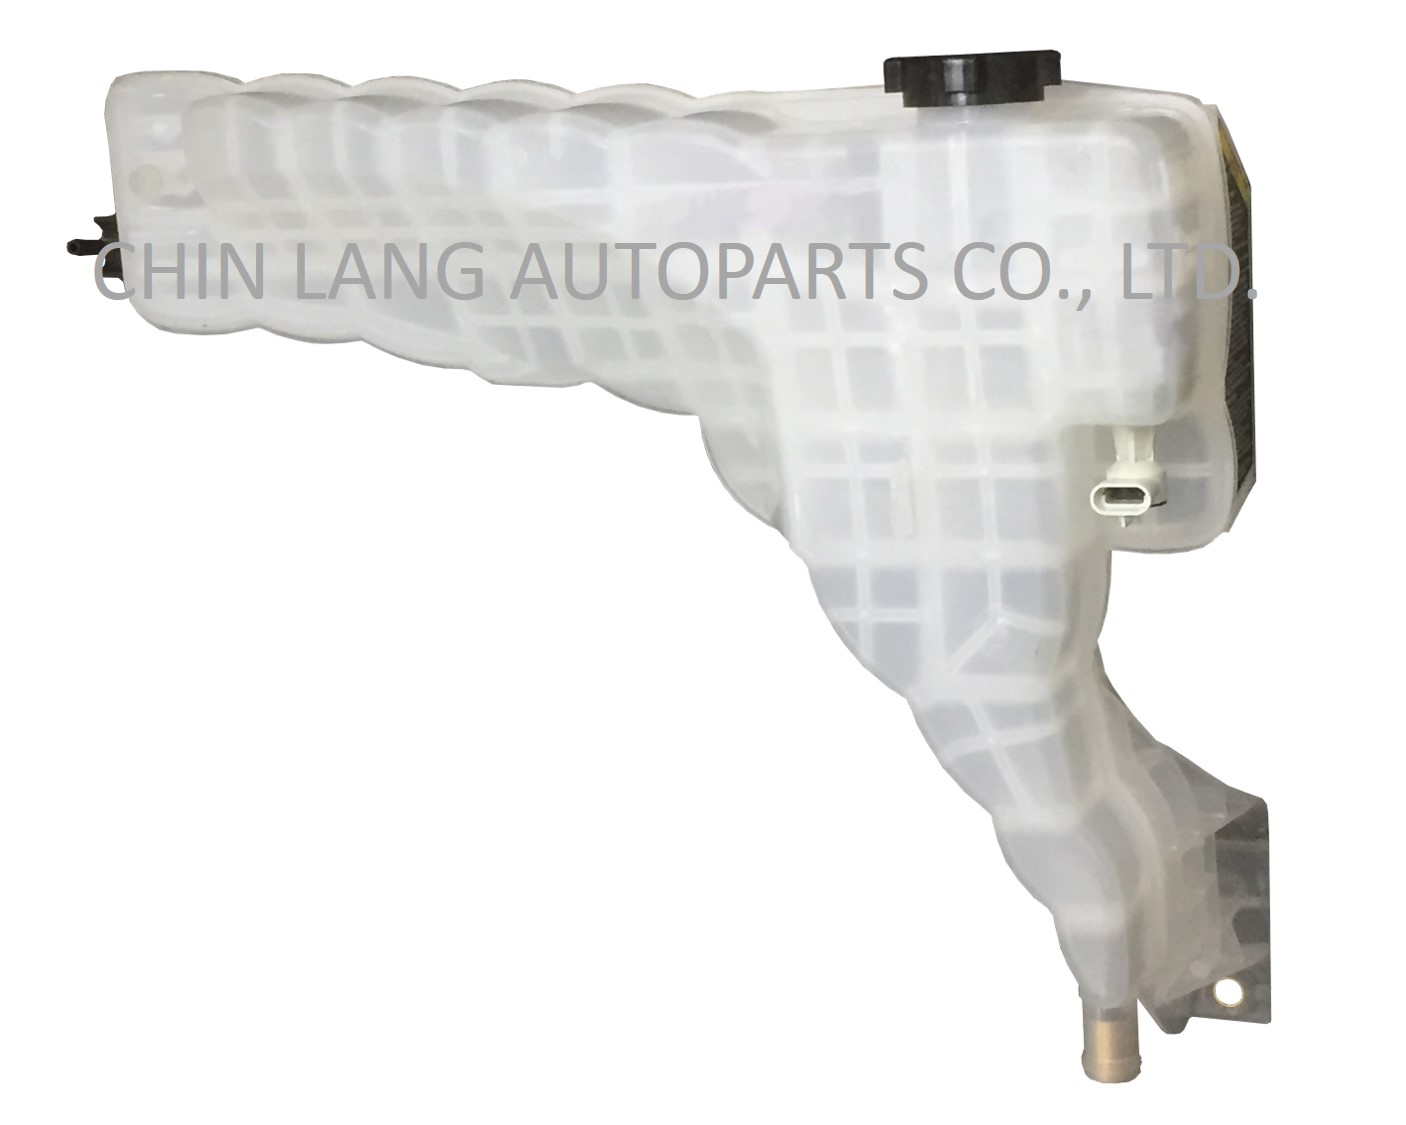 (Copy)-補助桶／副水箱 COOLANT TANK／SURGE TANK FOR FREIGHTLINER CASCADIA 2008~2019